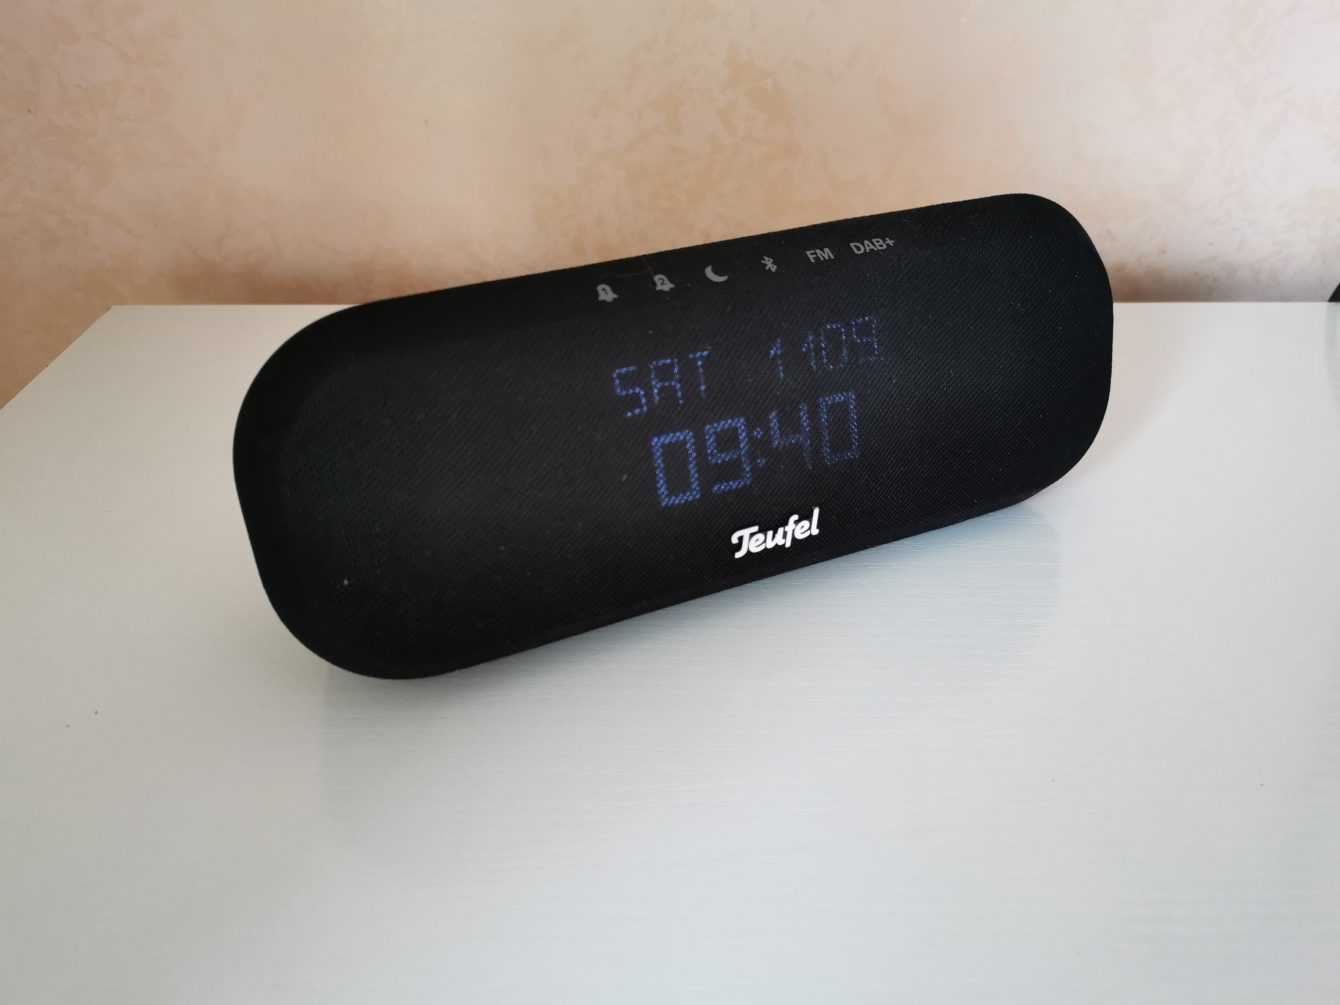 Teufel Radio One review: the nightclub on the nightstand